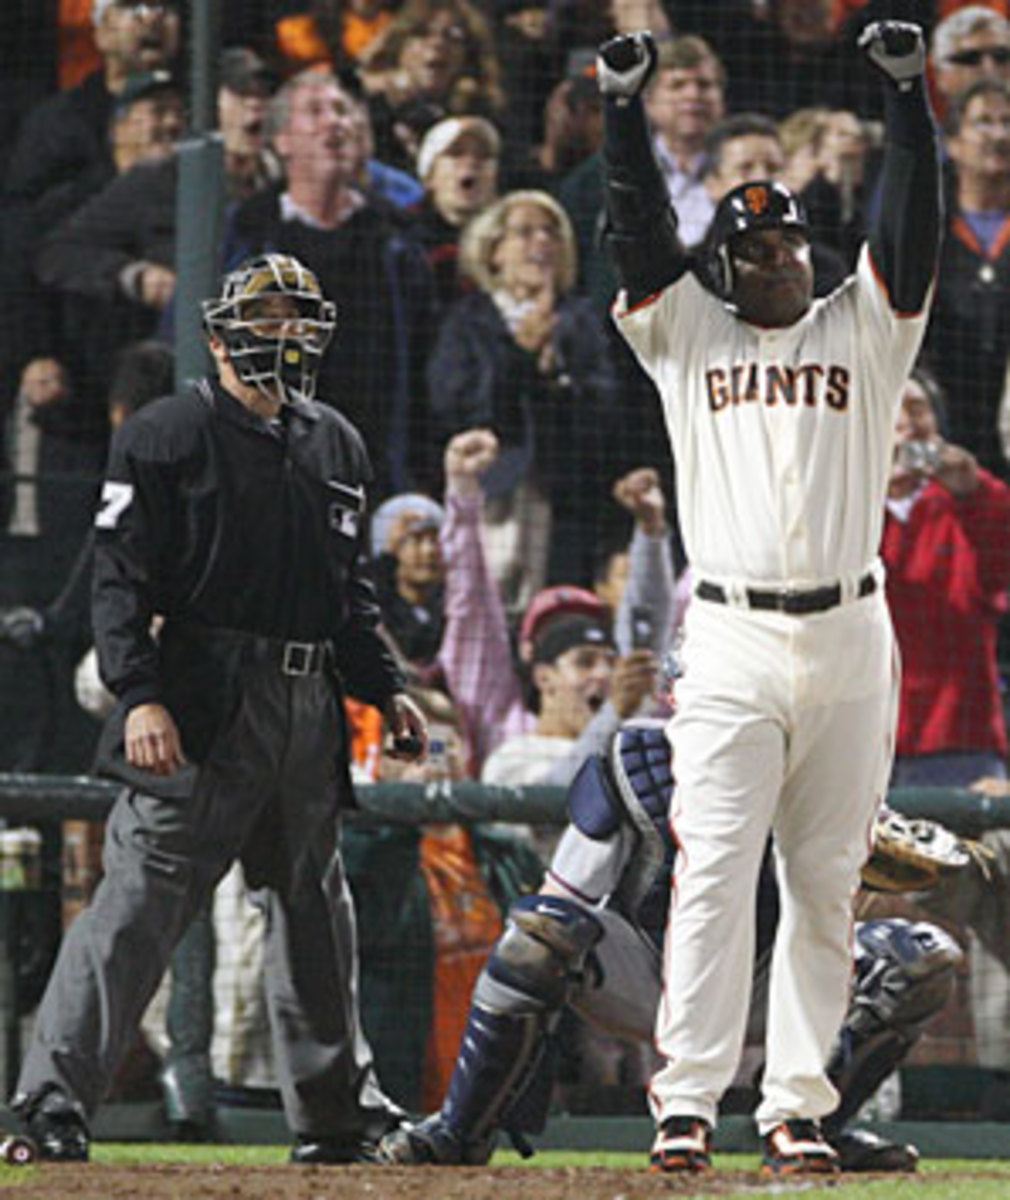 Barry Bonds broke Aaron's record in 2007 with far fewer people paying attention.